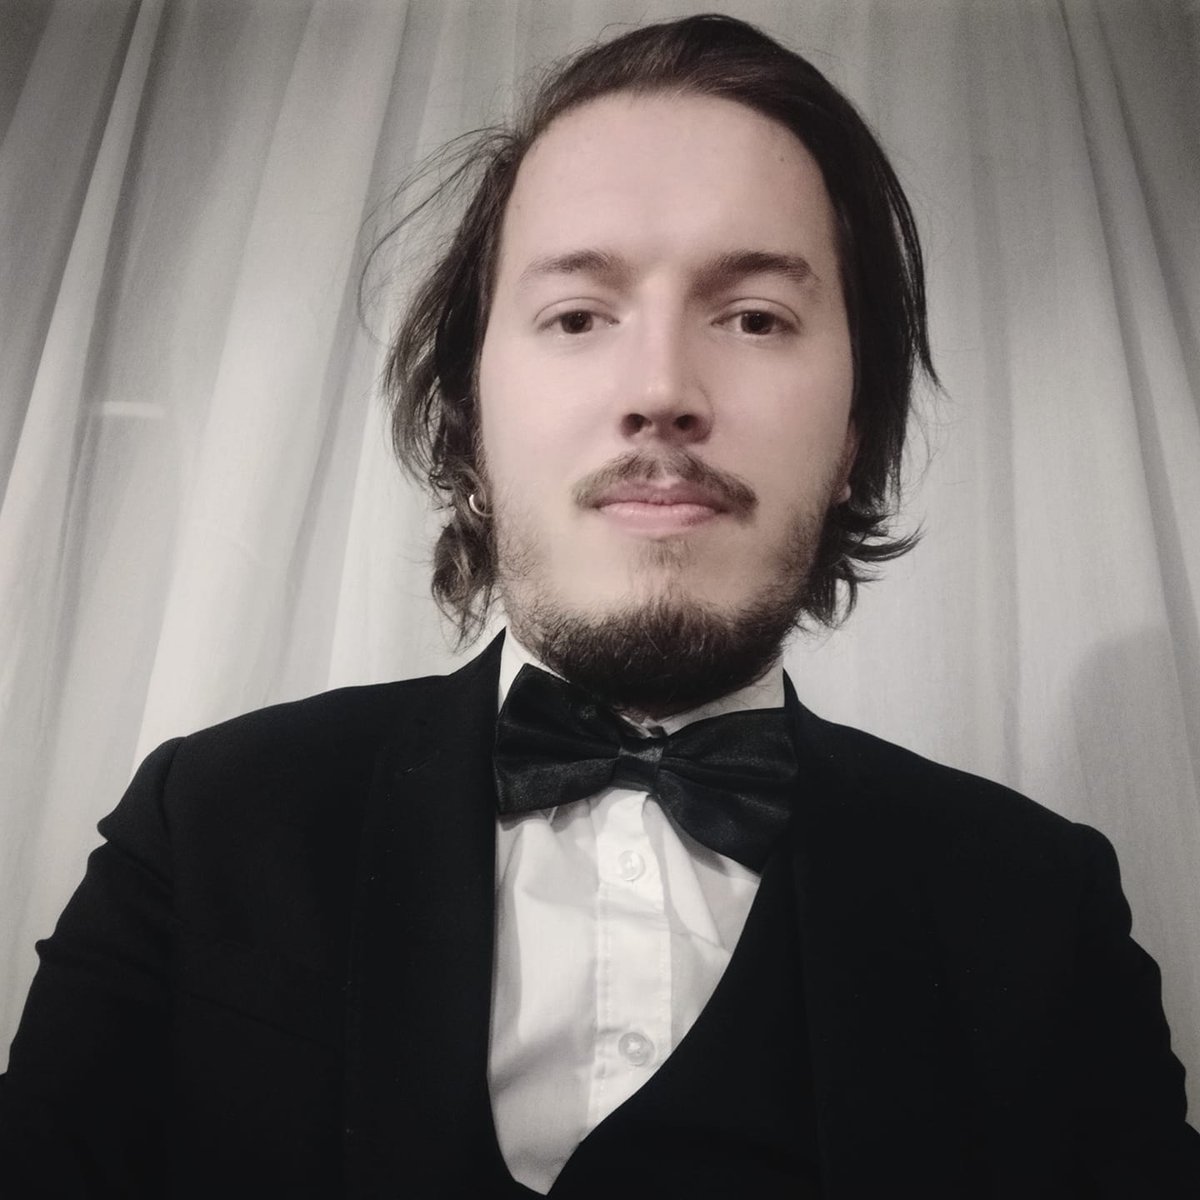 Jonathan Sigrist from the University of Helsinki has now started working as a virtual intern at the Secretariat. Read his captivating story! https://t.co/aGhXKFvsIr https://t.co/aBTMNPU4BZ